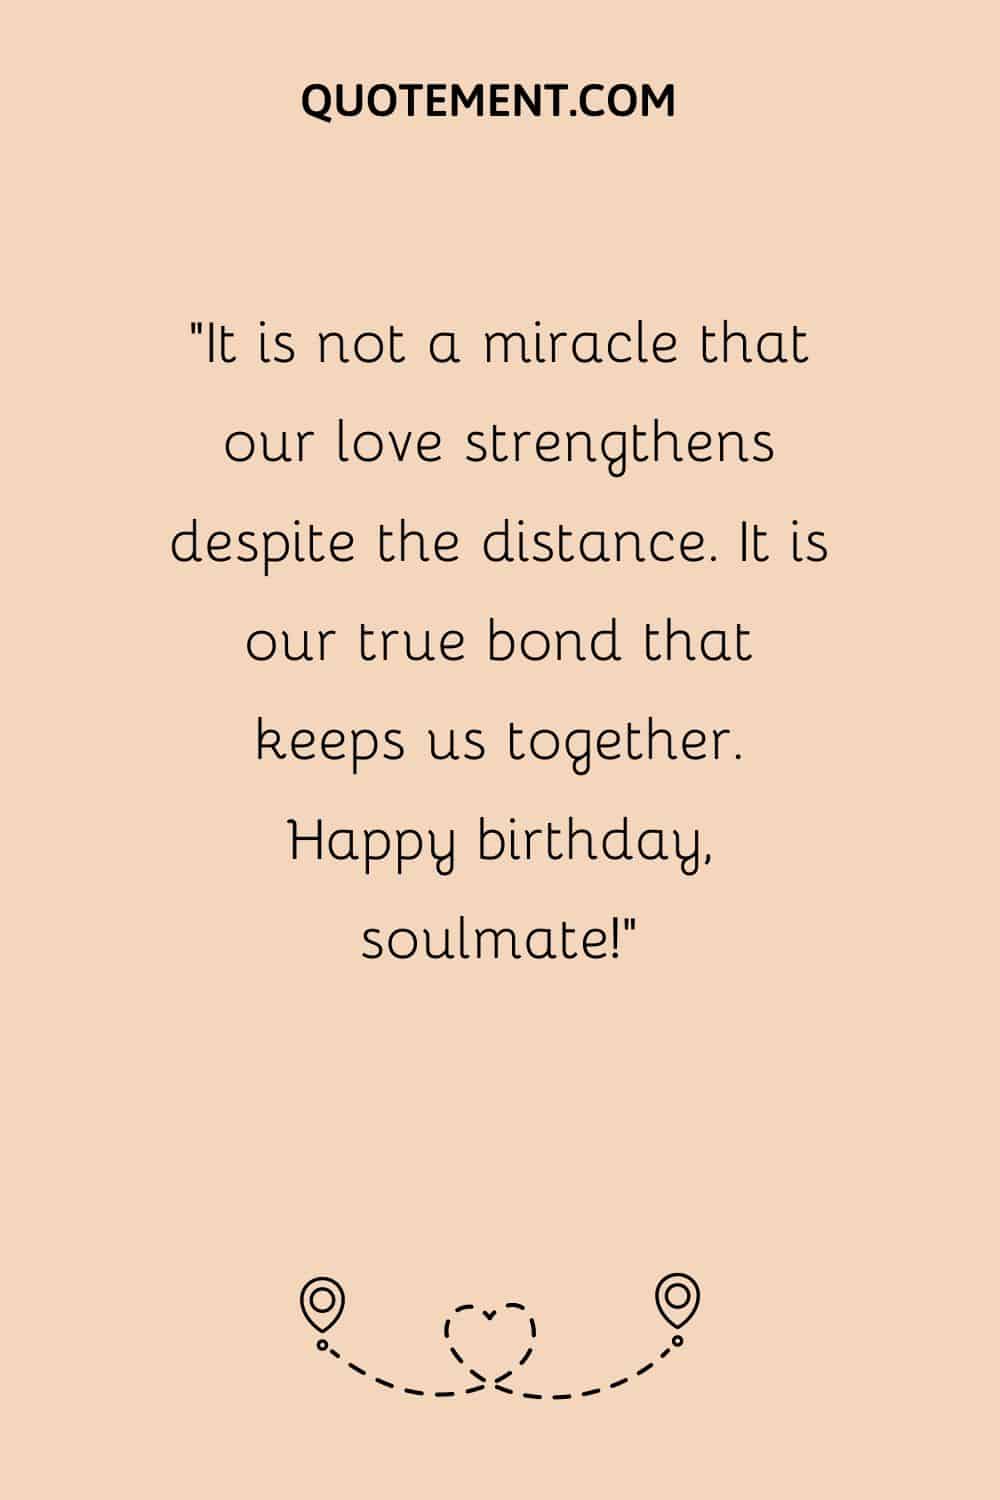 “It is not a miracle that our love strengthens despite the distance. It is our true bond that keeps us together. Happy birthday, soulmate!”